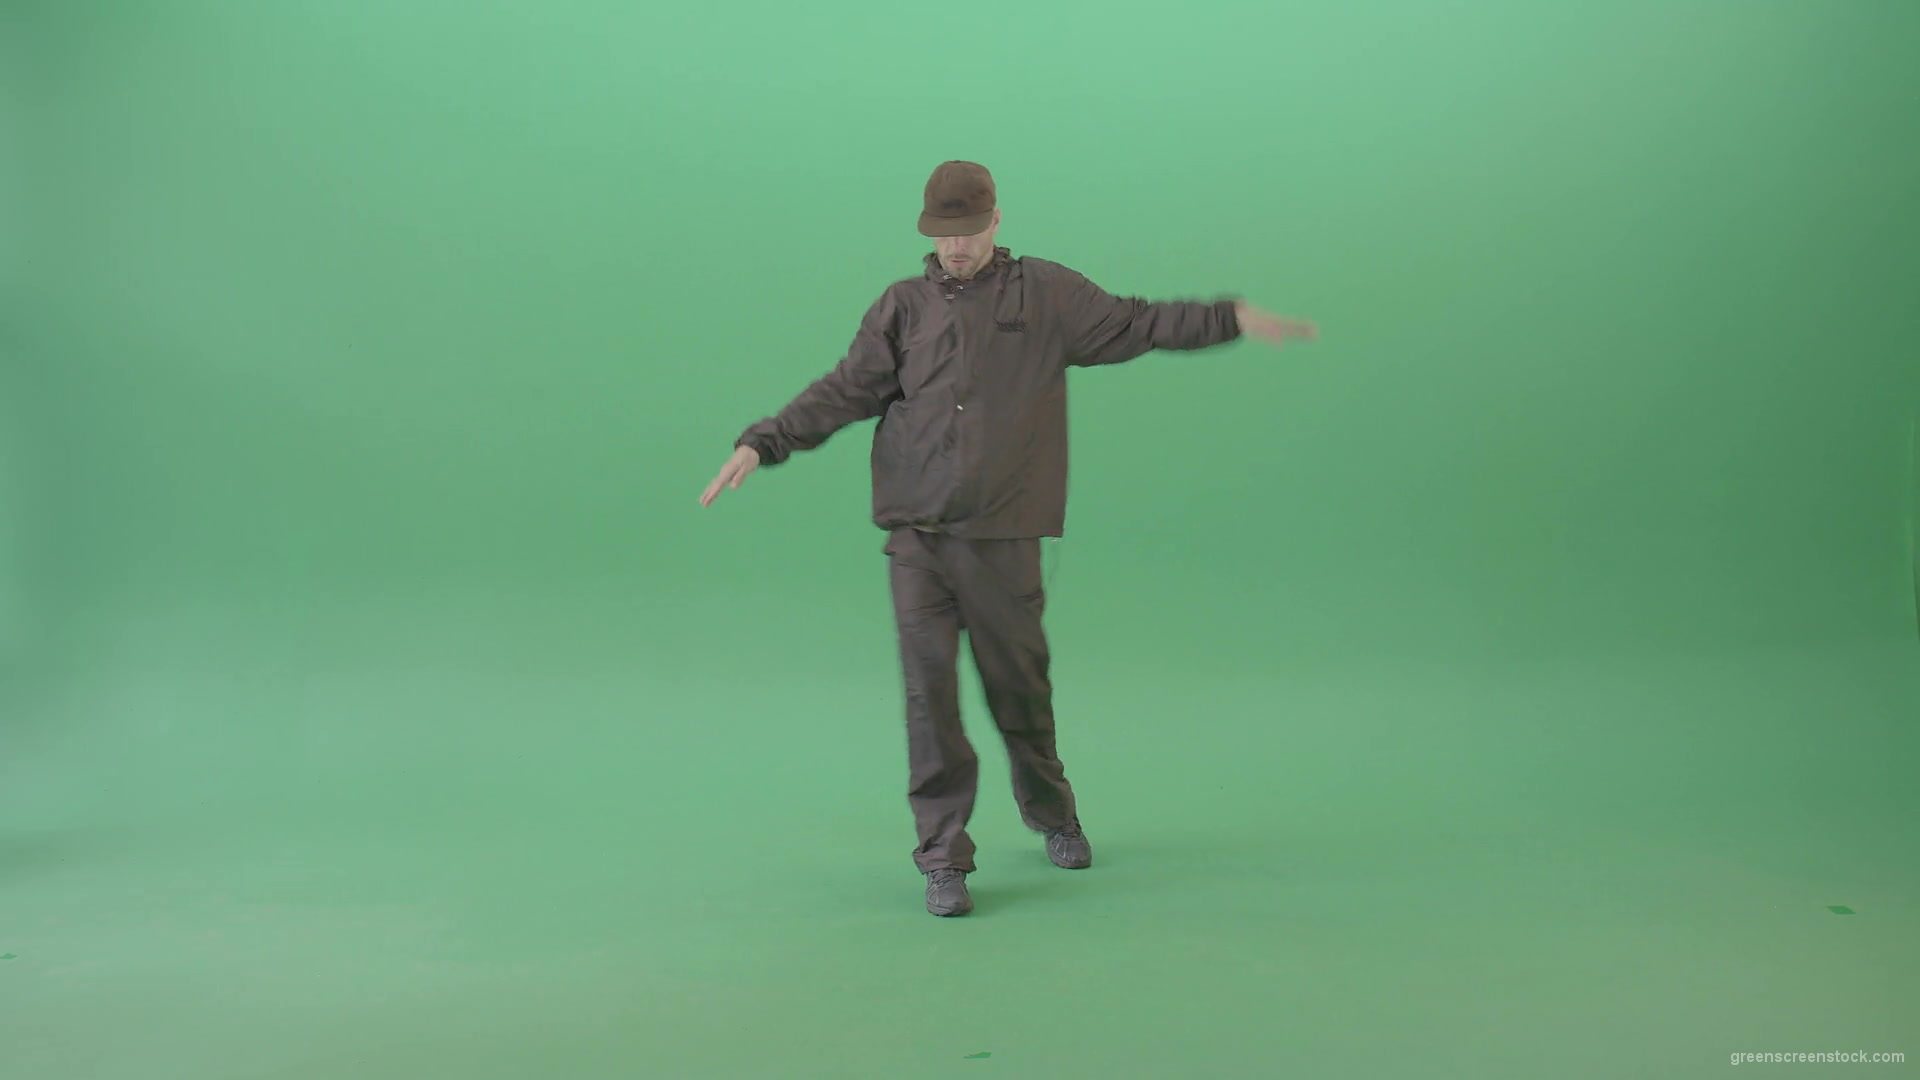 Top-Break-dance-by-electric-boogie-hip-hop-dancer-isolated-on-green-screen-4K-Video-Footage-1920_009 Green Screen Stock